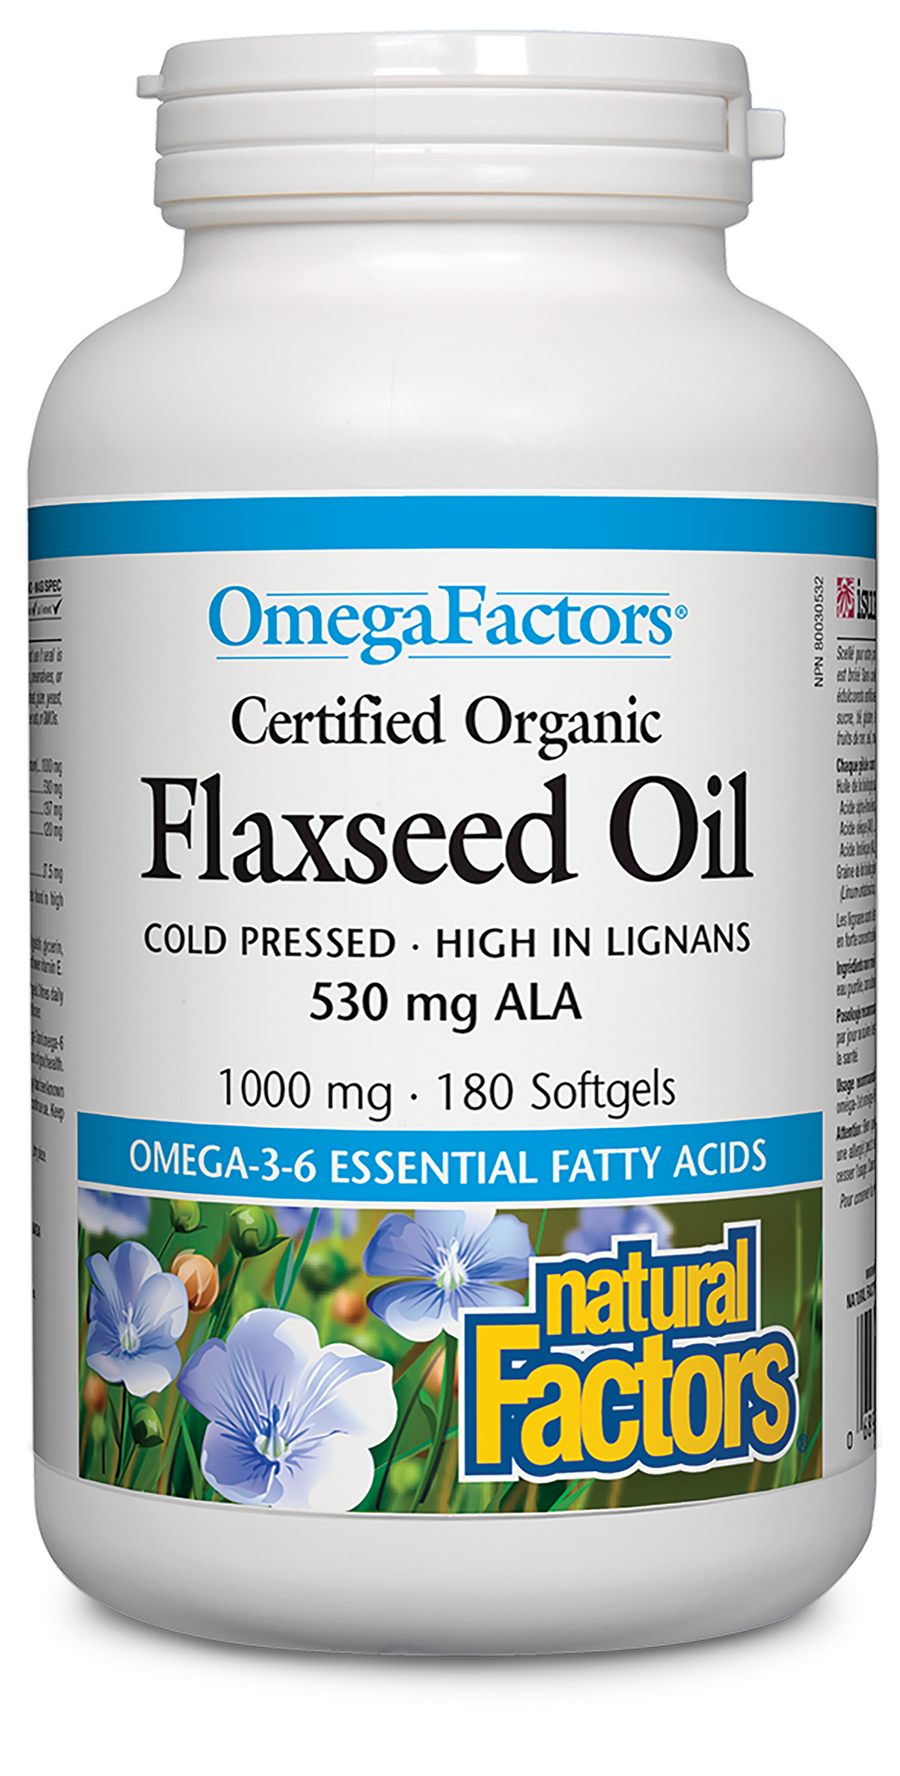 Natural Factors Certified Organic Flaxseed Oil 1000mg 180 Softgels